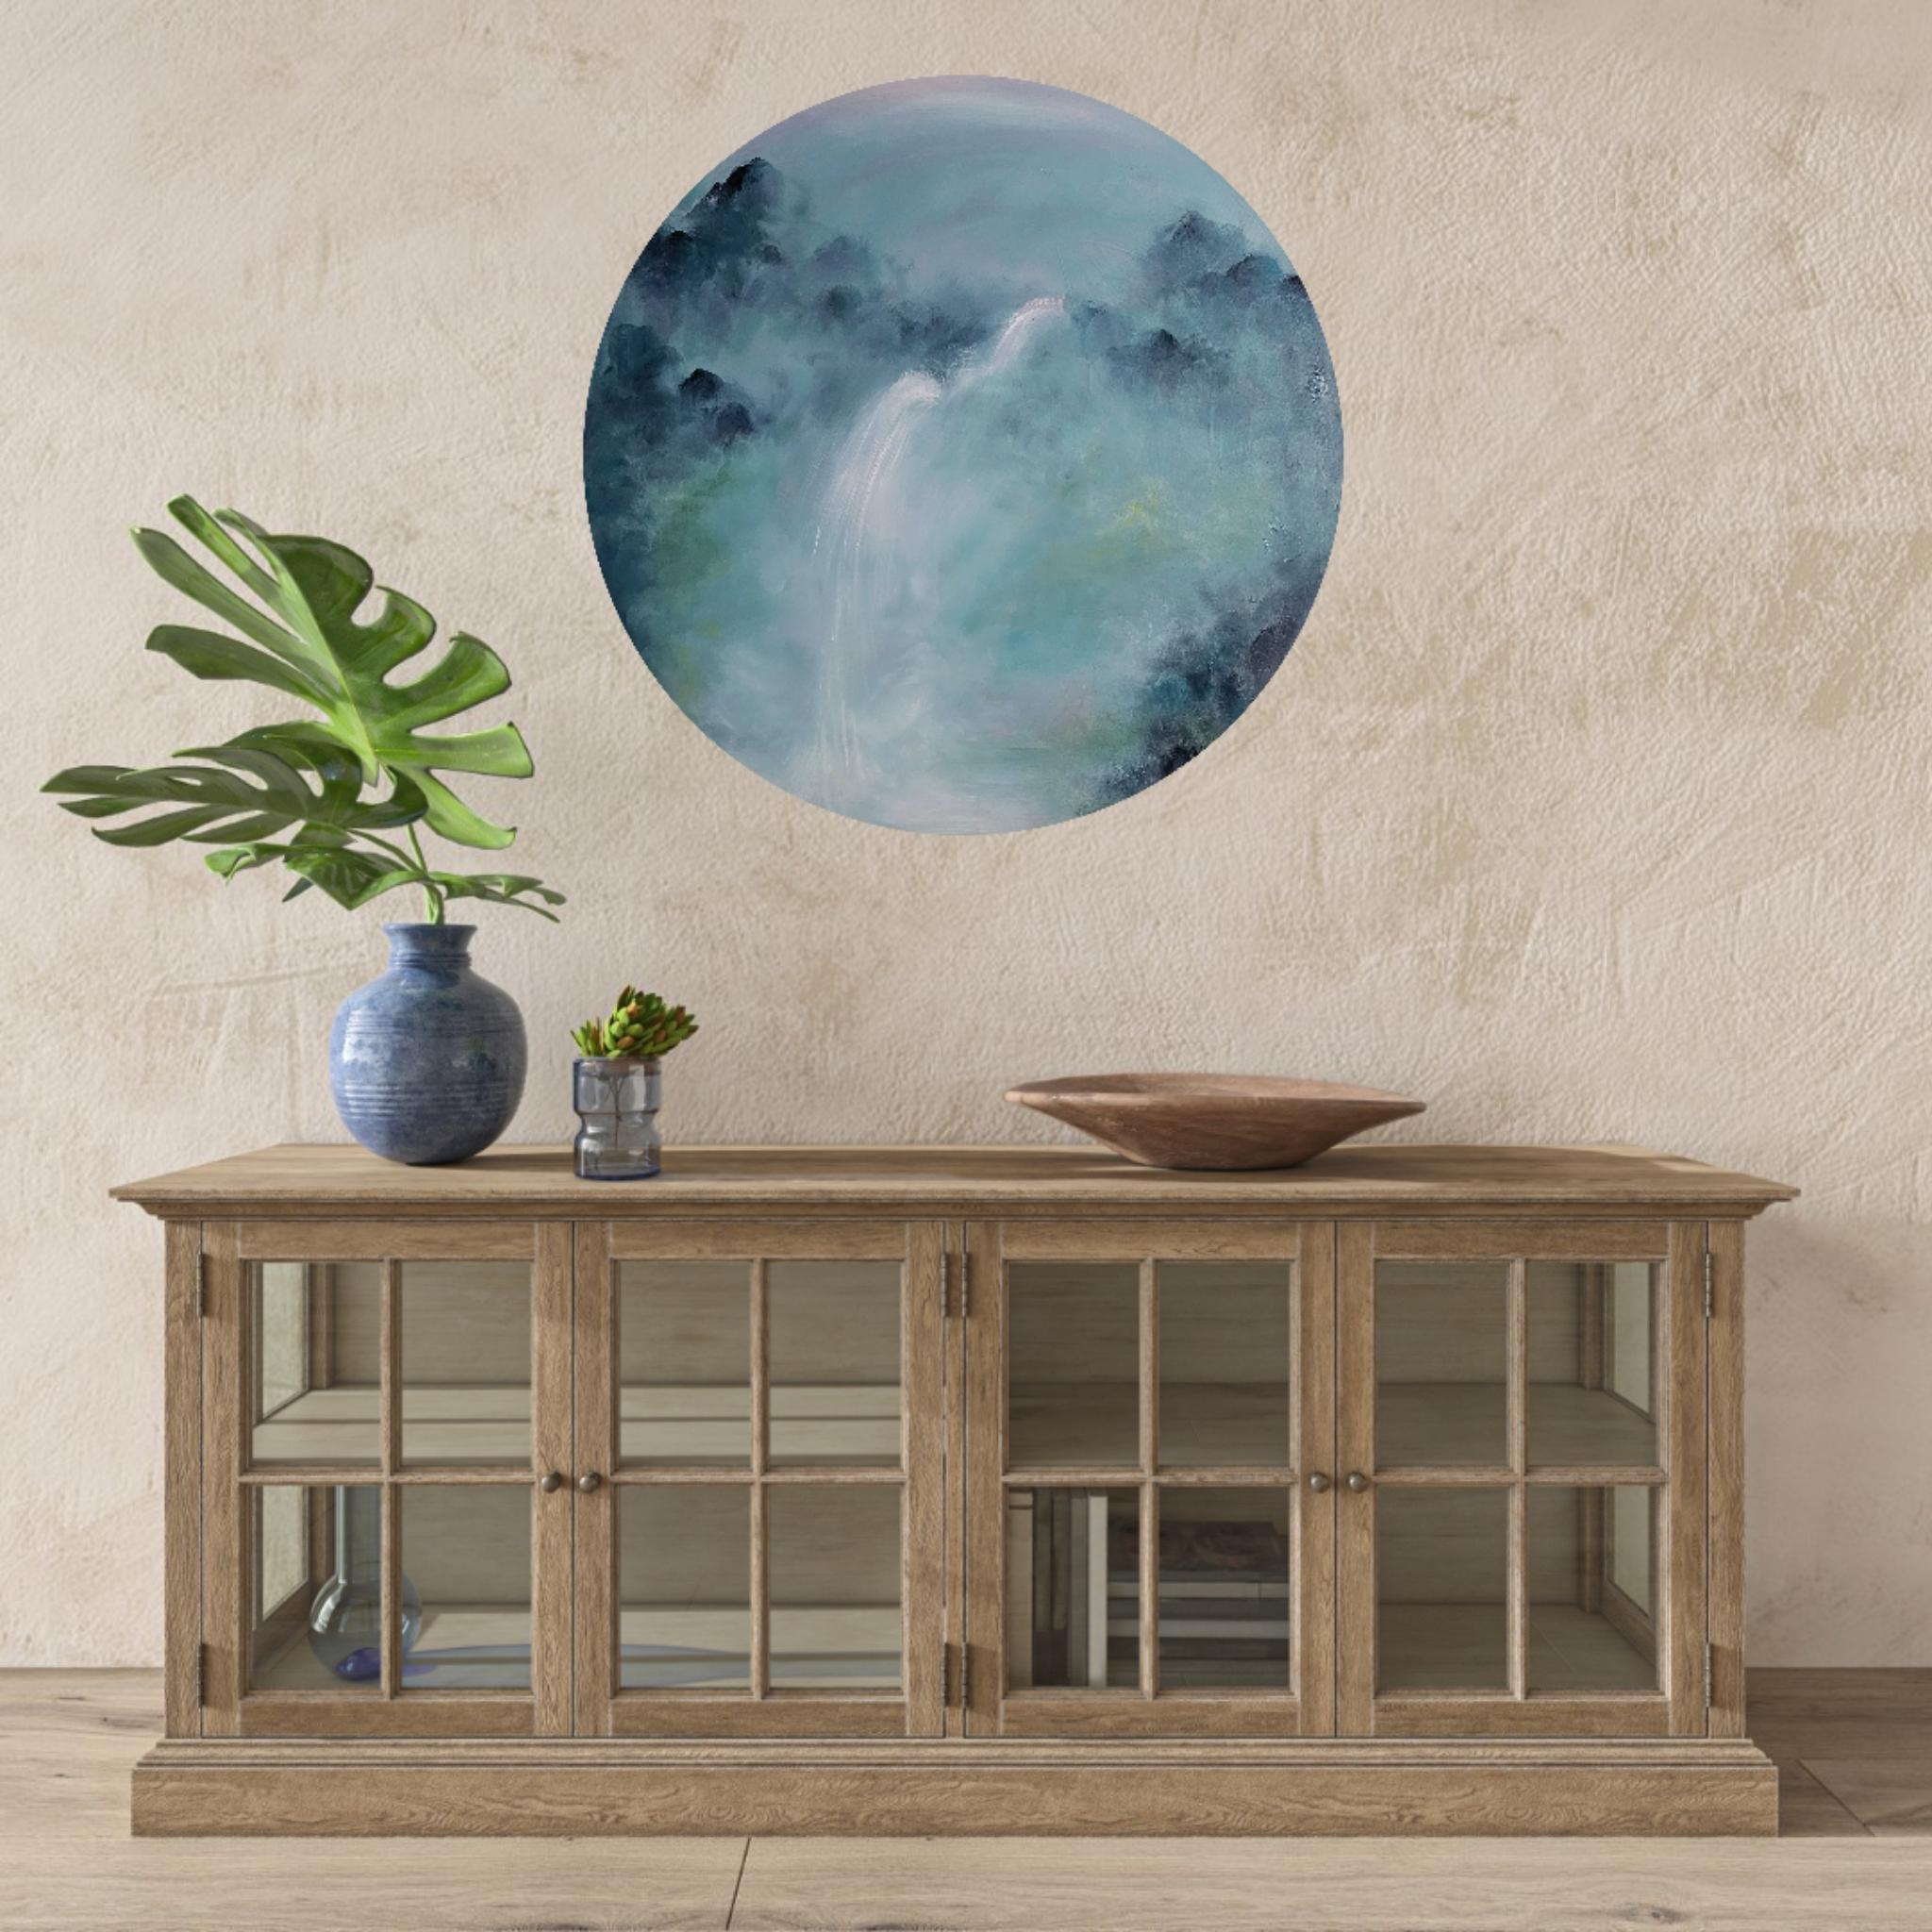 A beautiful round canvas abstract landscape painting, with mystical mountains and a waterfall, inspired by the beautiful music with the same name, 